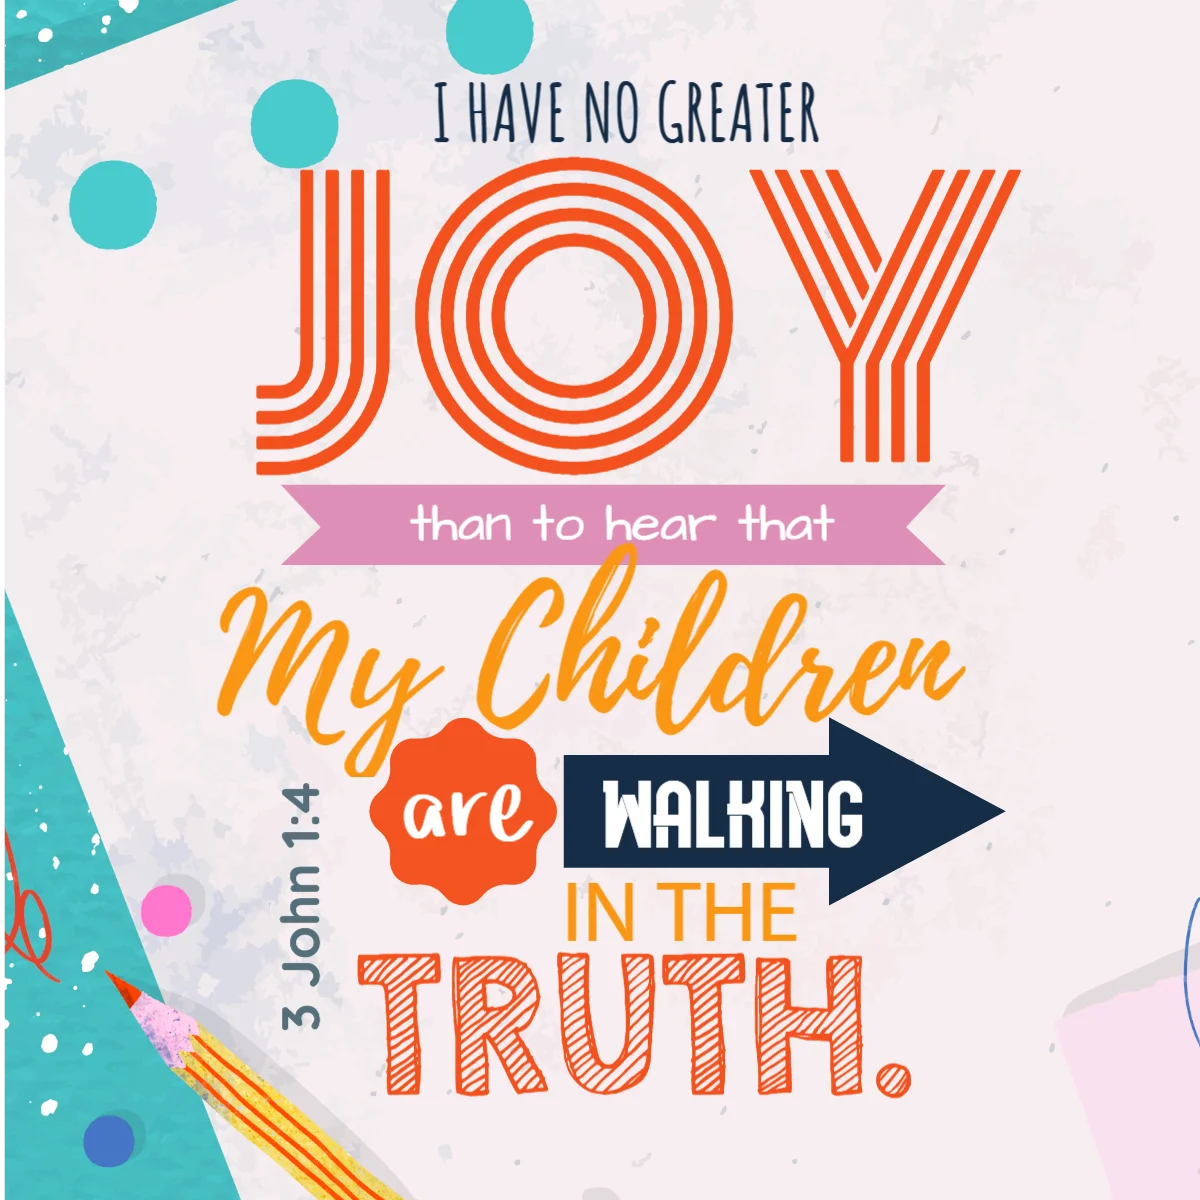 I HAVE A GREAT JOY THAN TO HEAR High Quality Children's Church Graphics For Free by Ministry Voice